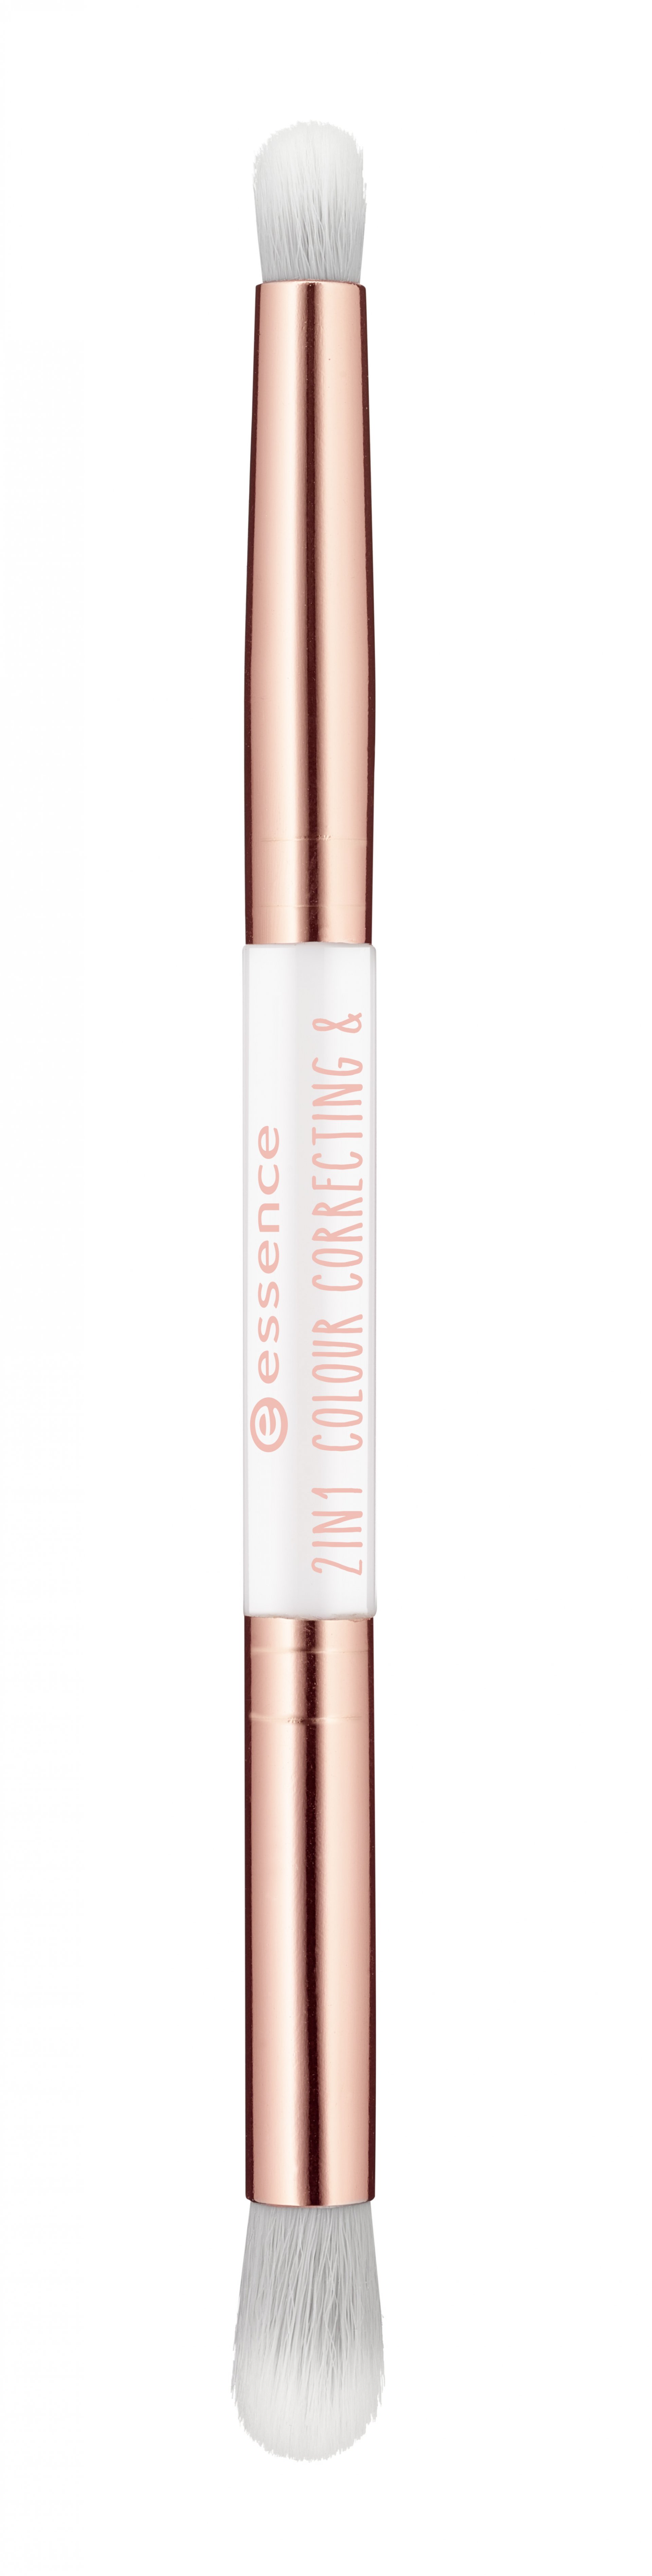 essence 2in1 colour correcting & contouring brush